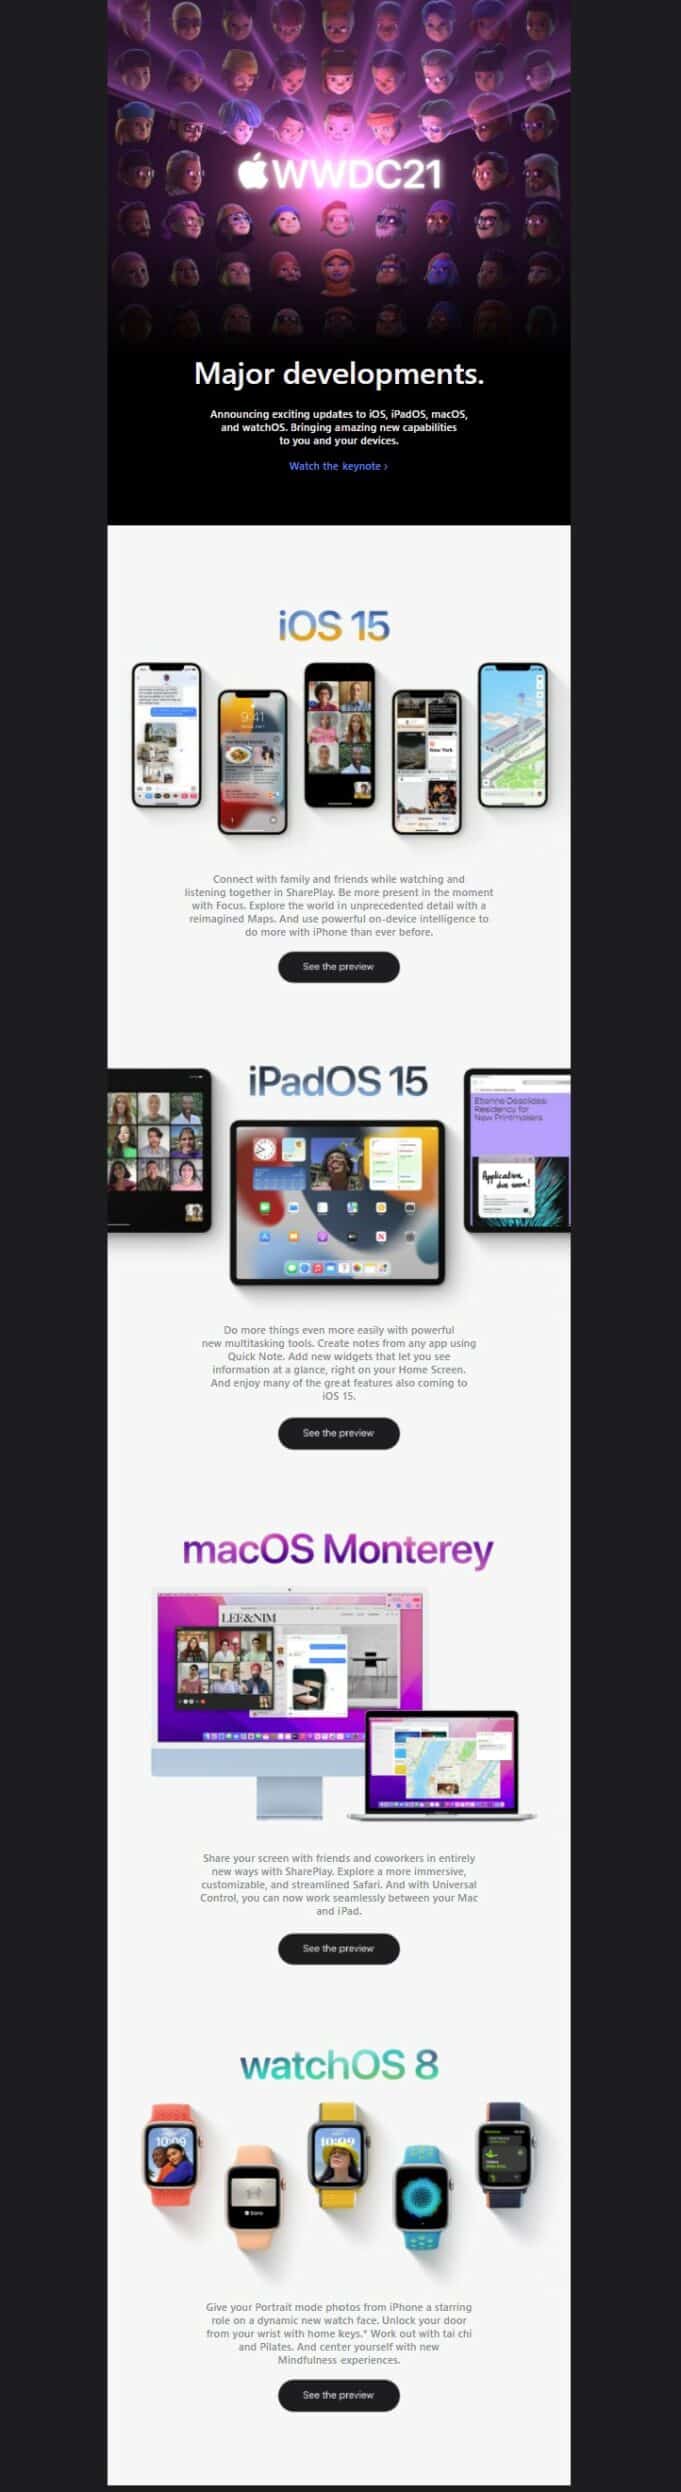 Announcing exciting updates to iOS, iPadOS, macOS, and watchOS. Bringing amazing new capabilities to you and your devices.